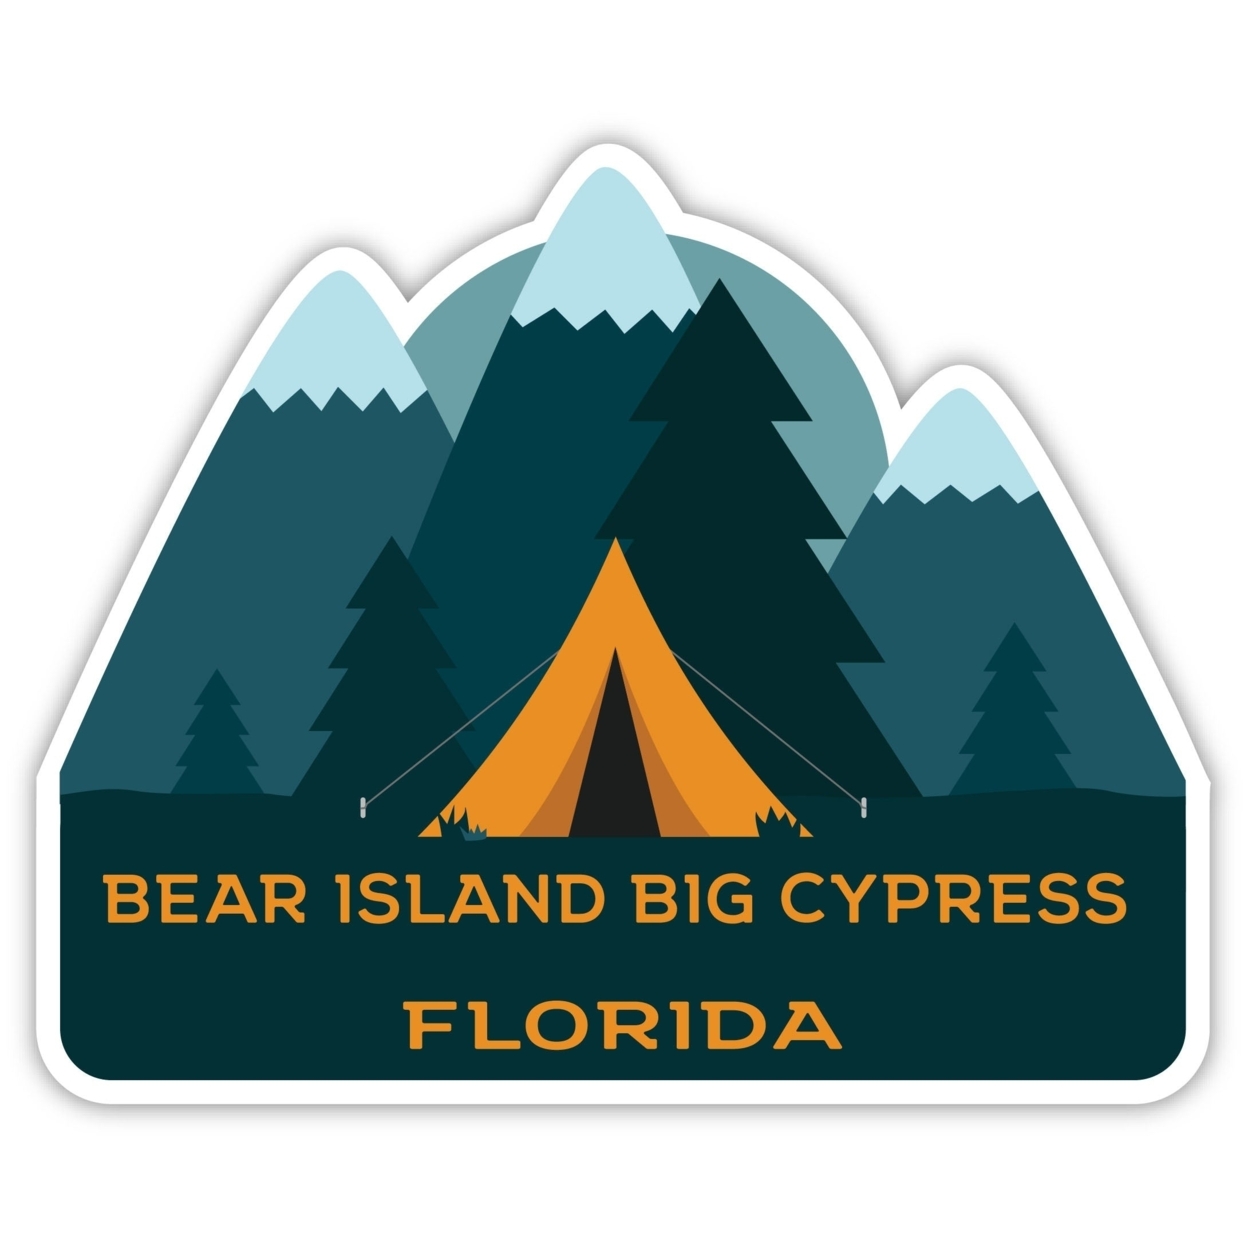 Bear Island Big Cypress Florida Souvenir Decorative Stickers (Choose Theme And Size) - 4-Pack, 10-Inch, Tent